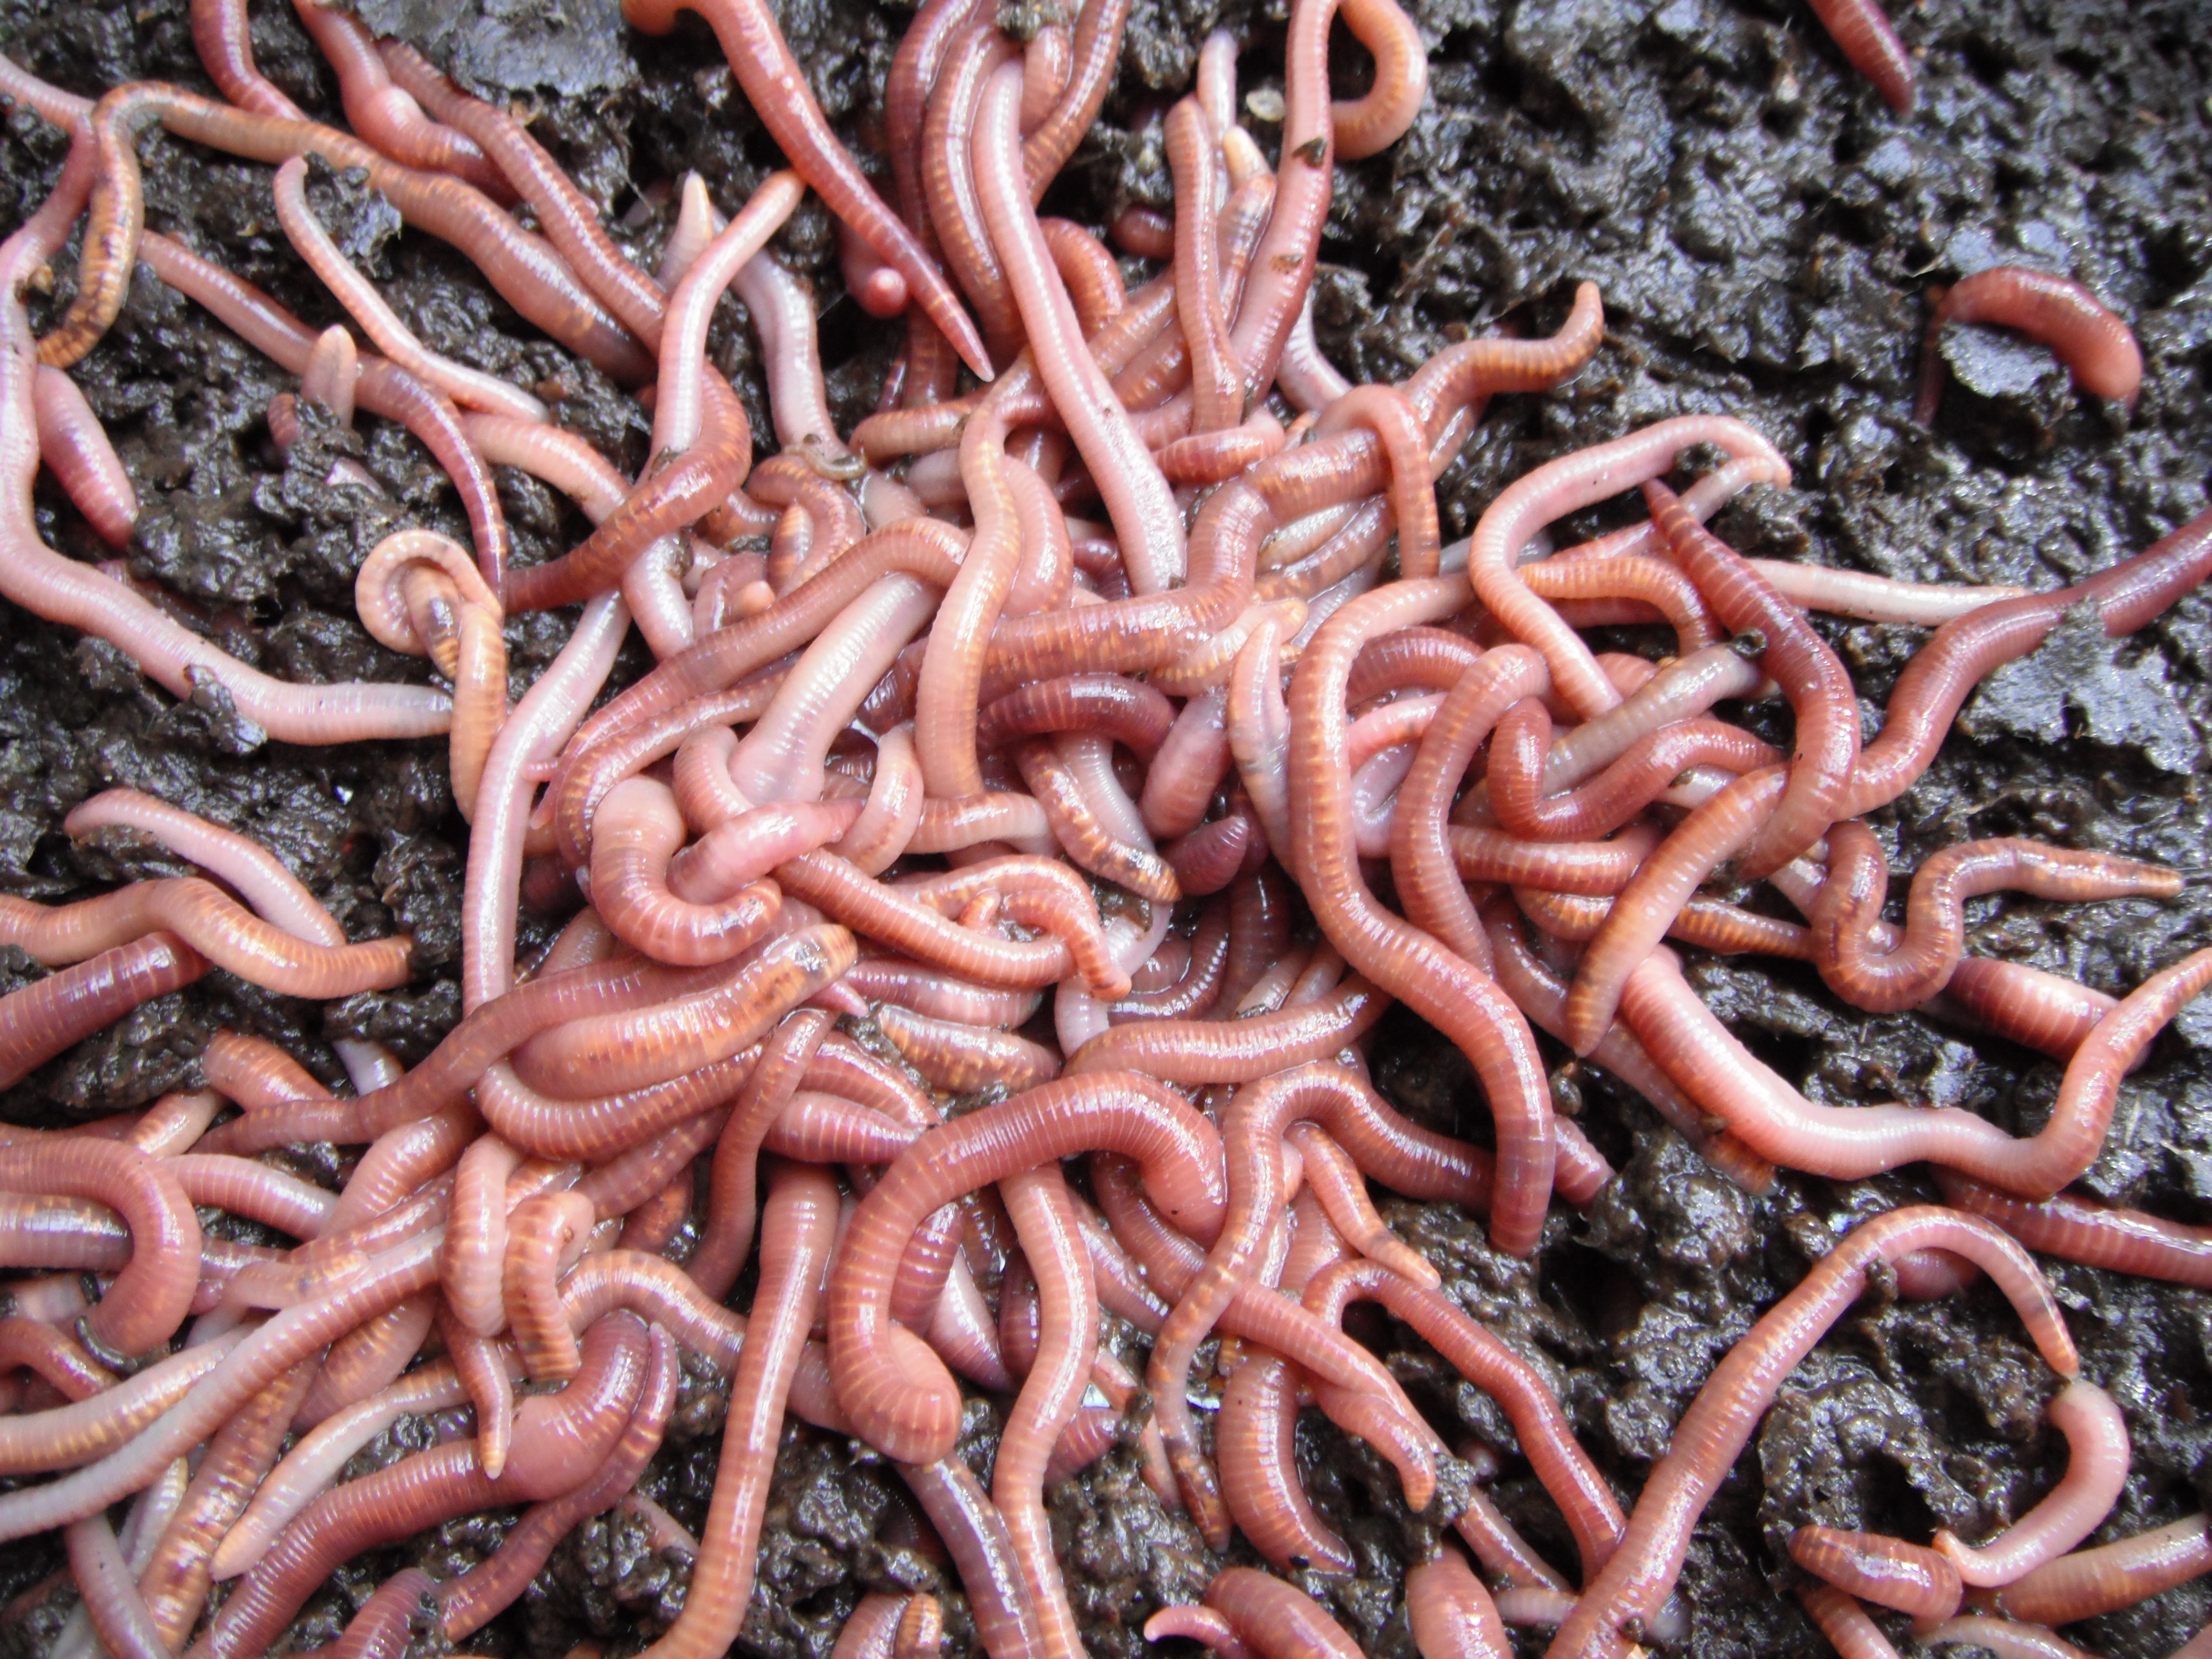 Worms #23